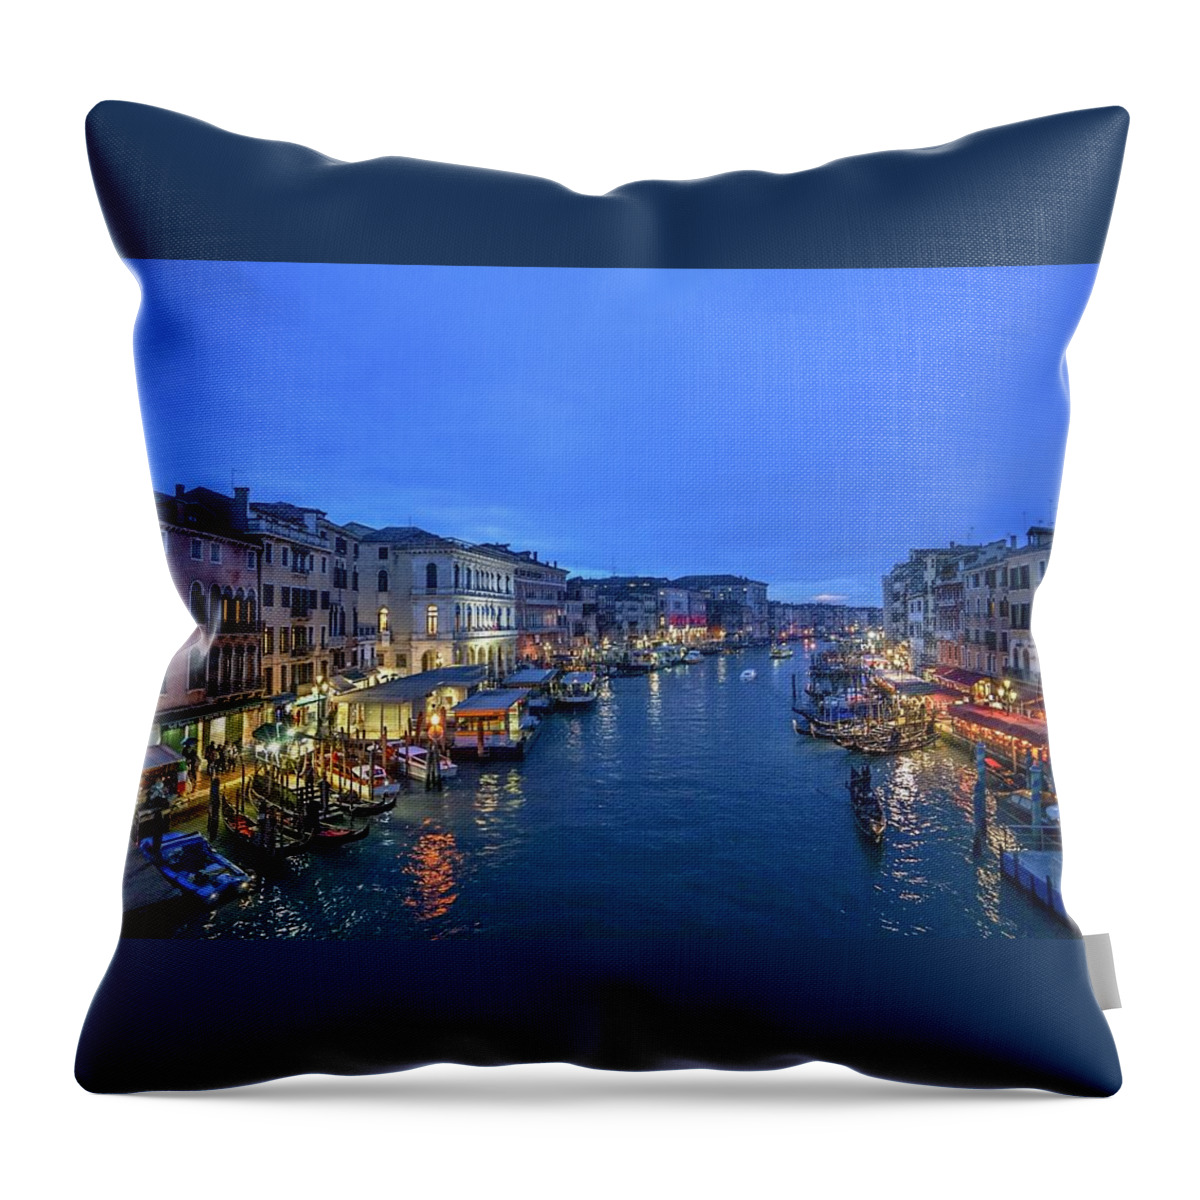 Italy Throw Pillow featuring the photograph Italy Venice Night View by Street Fashion News